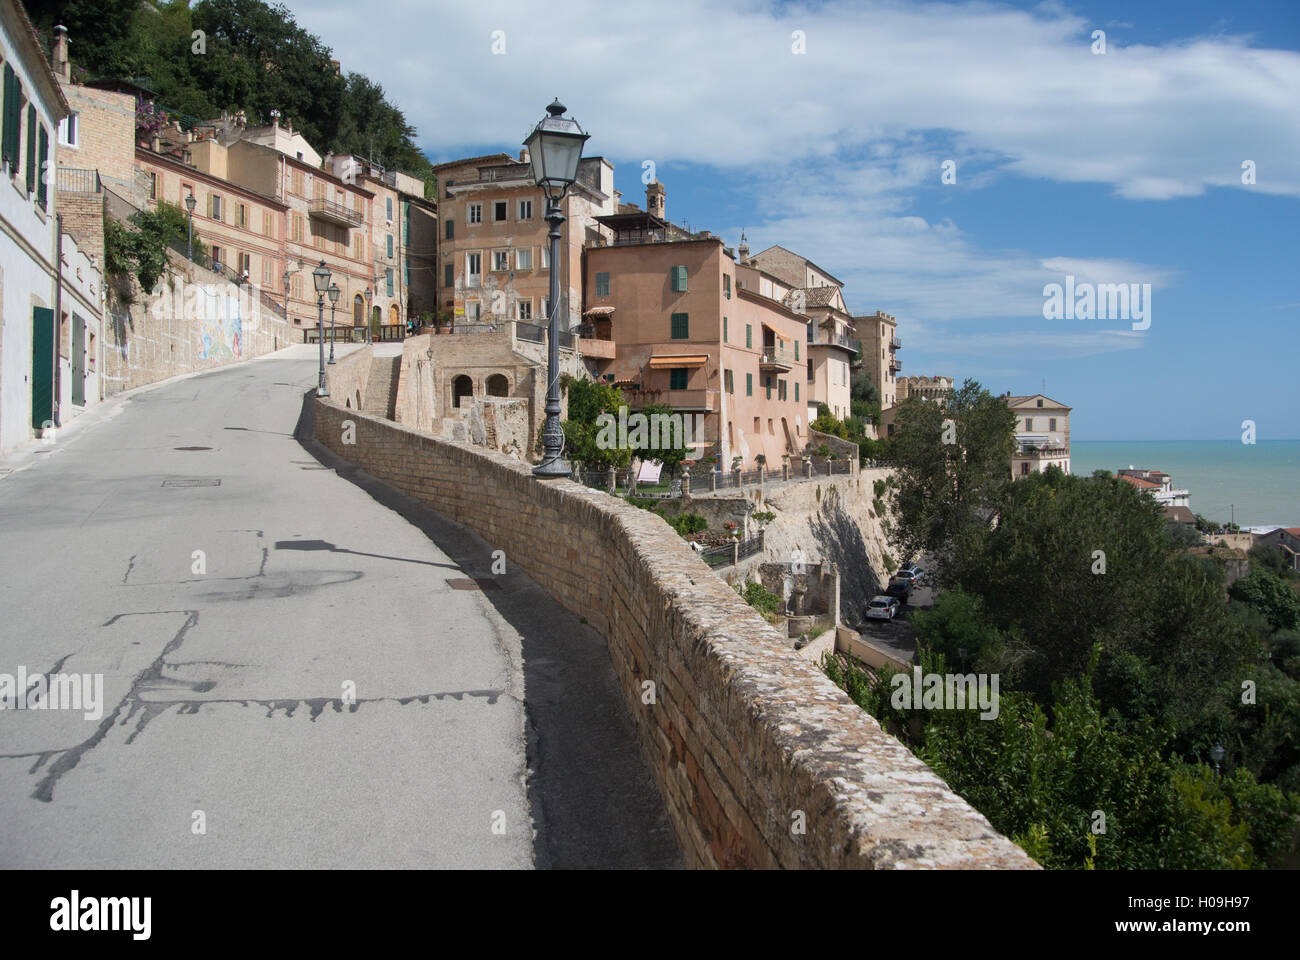 Road towards medieval city of Grottammare, Marche, Italy Stock Photo